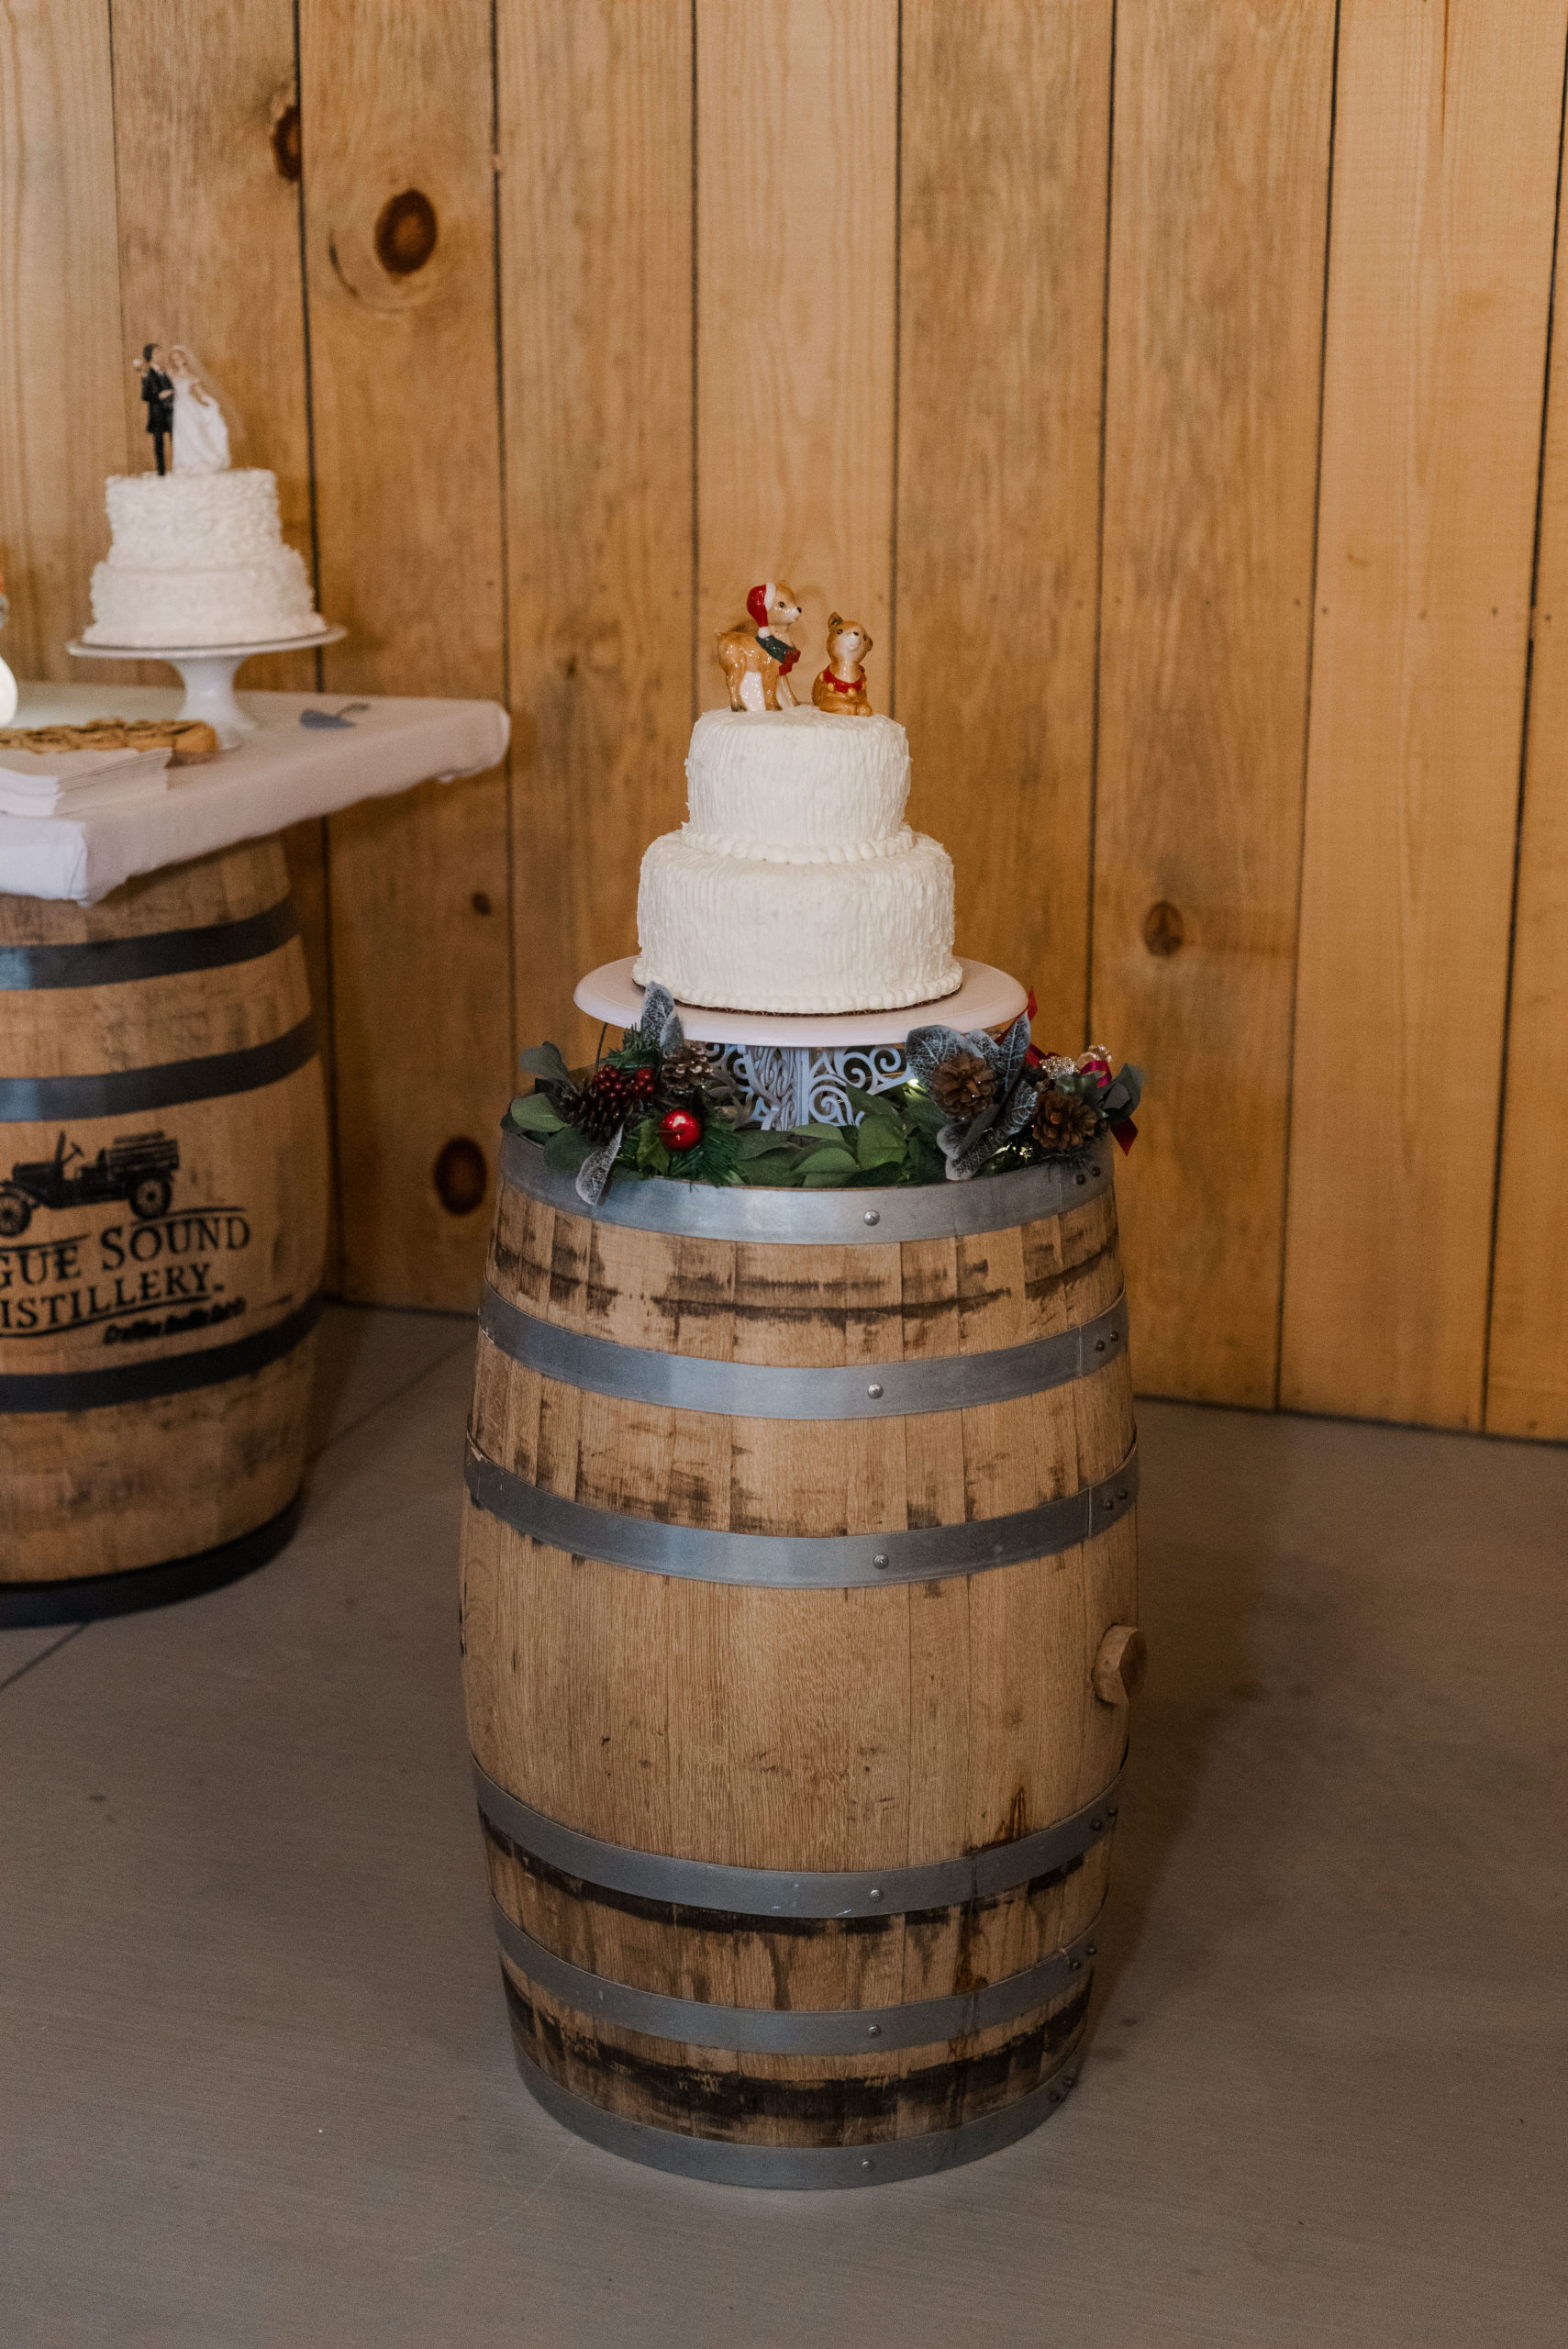 wedding cake with reindeer cake topper Wright Memorial Event Center